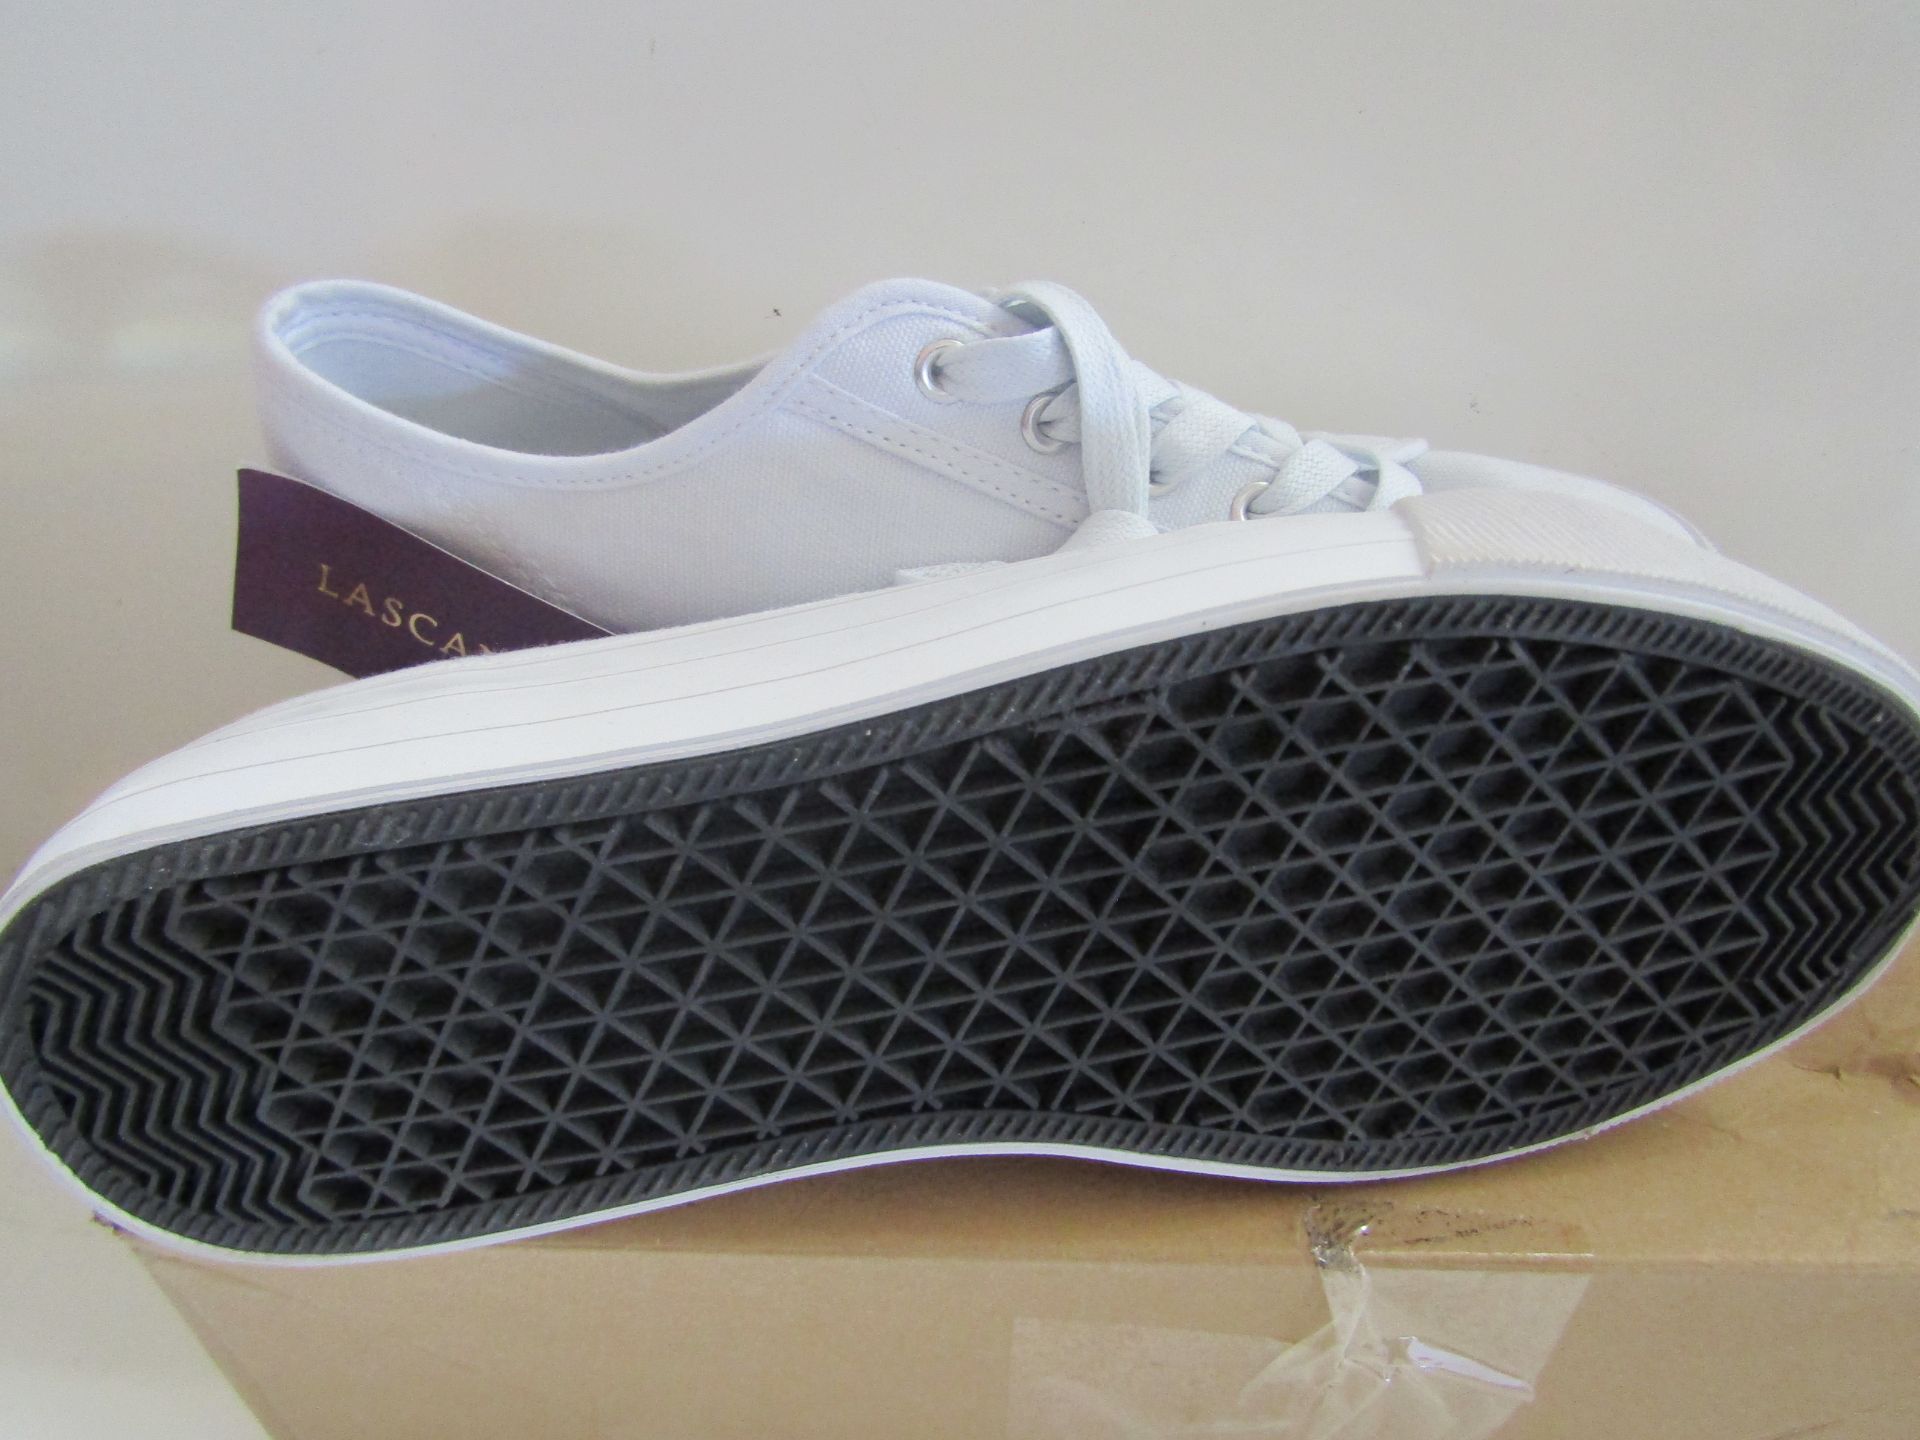 Lascana Sneaker White Size 41 New & Boxed - Image 2 of 3